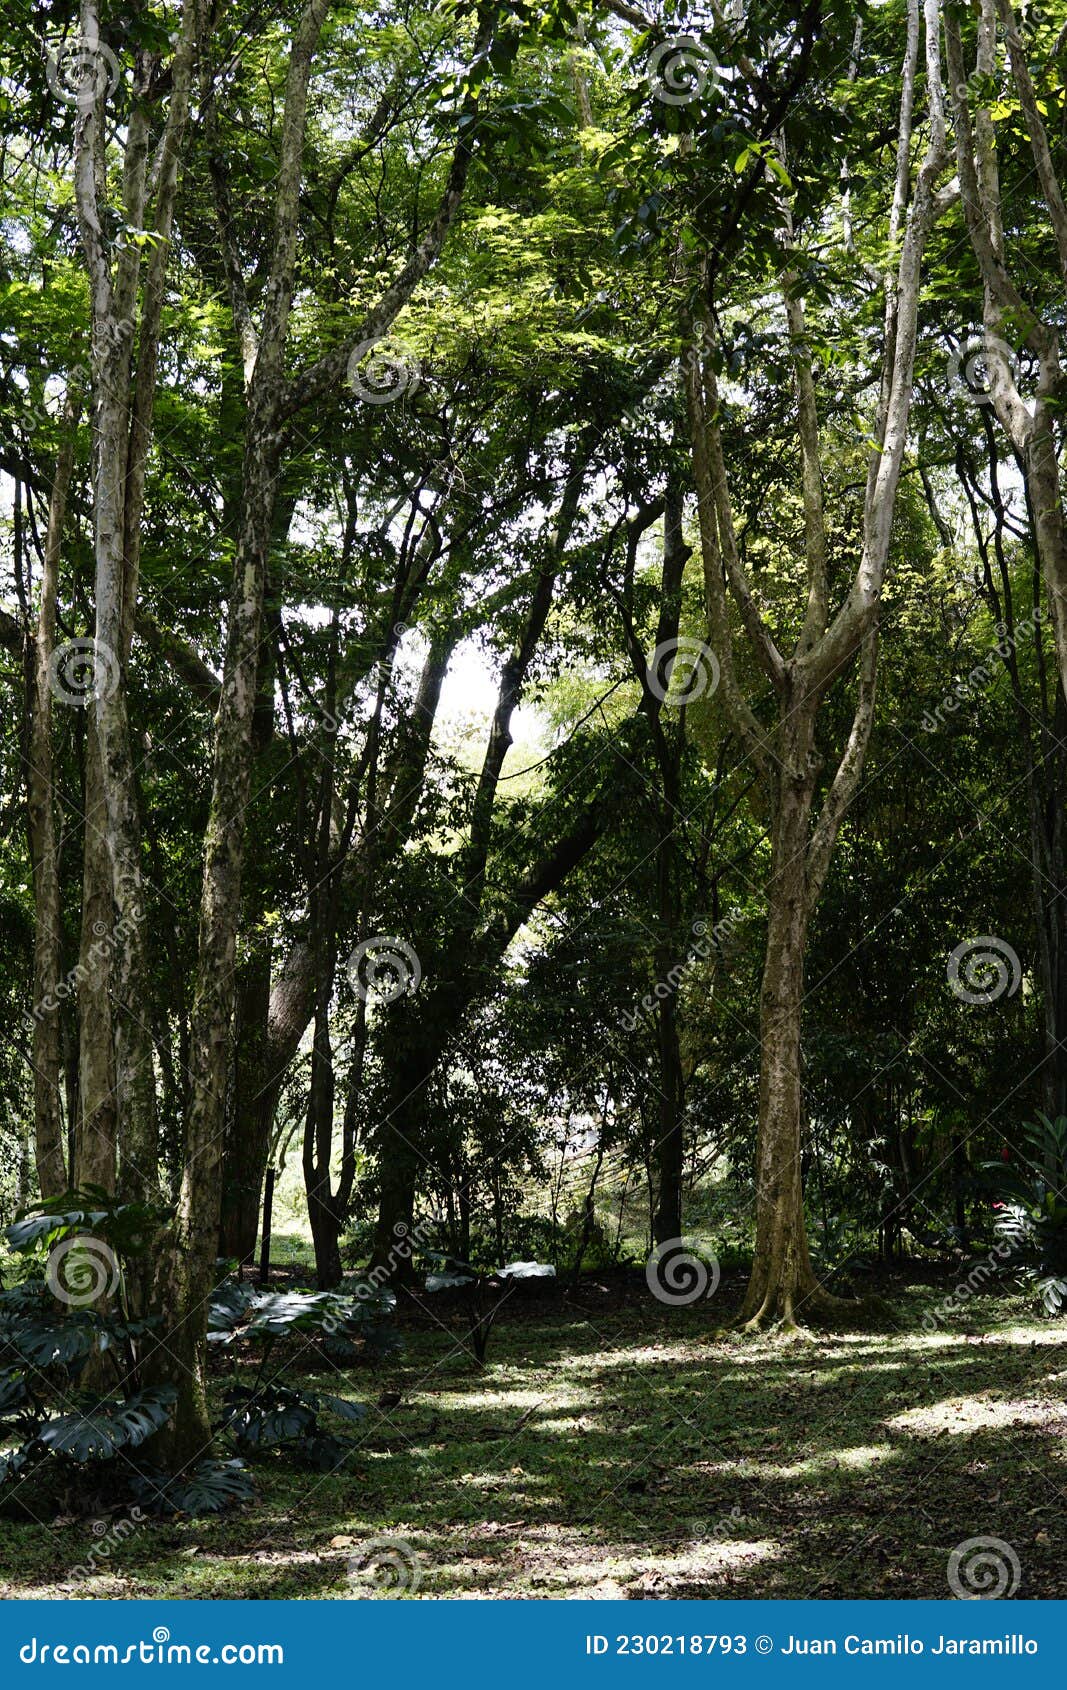 cali, colombia; september 19 2021: people visit the ecologic park las garzas in cali, colombia, with wild animals and different tr